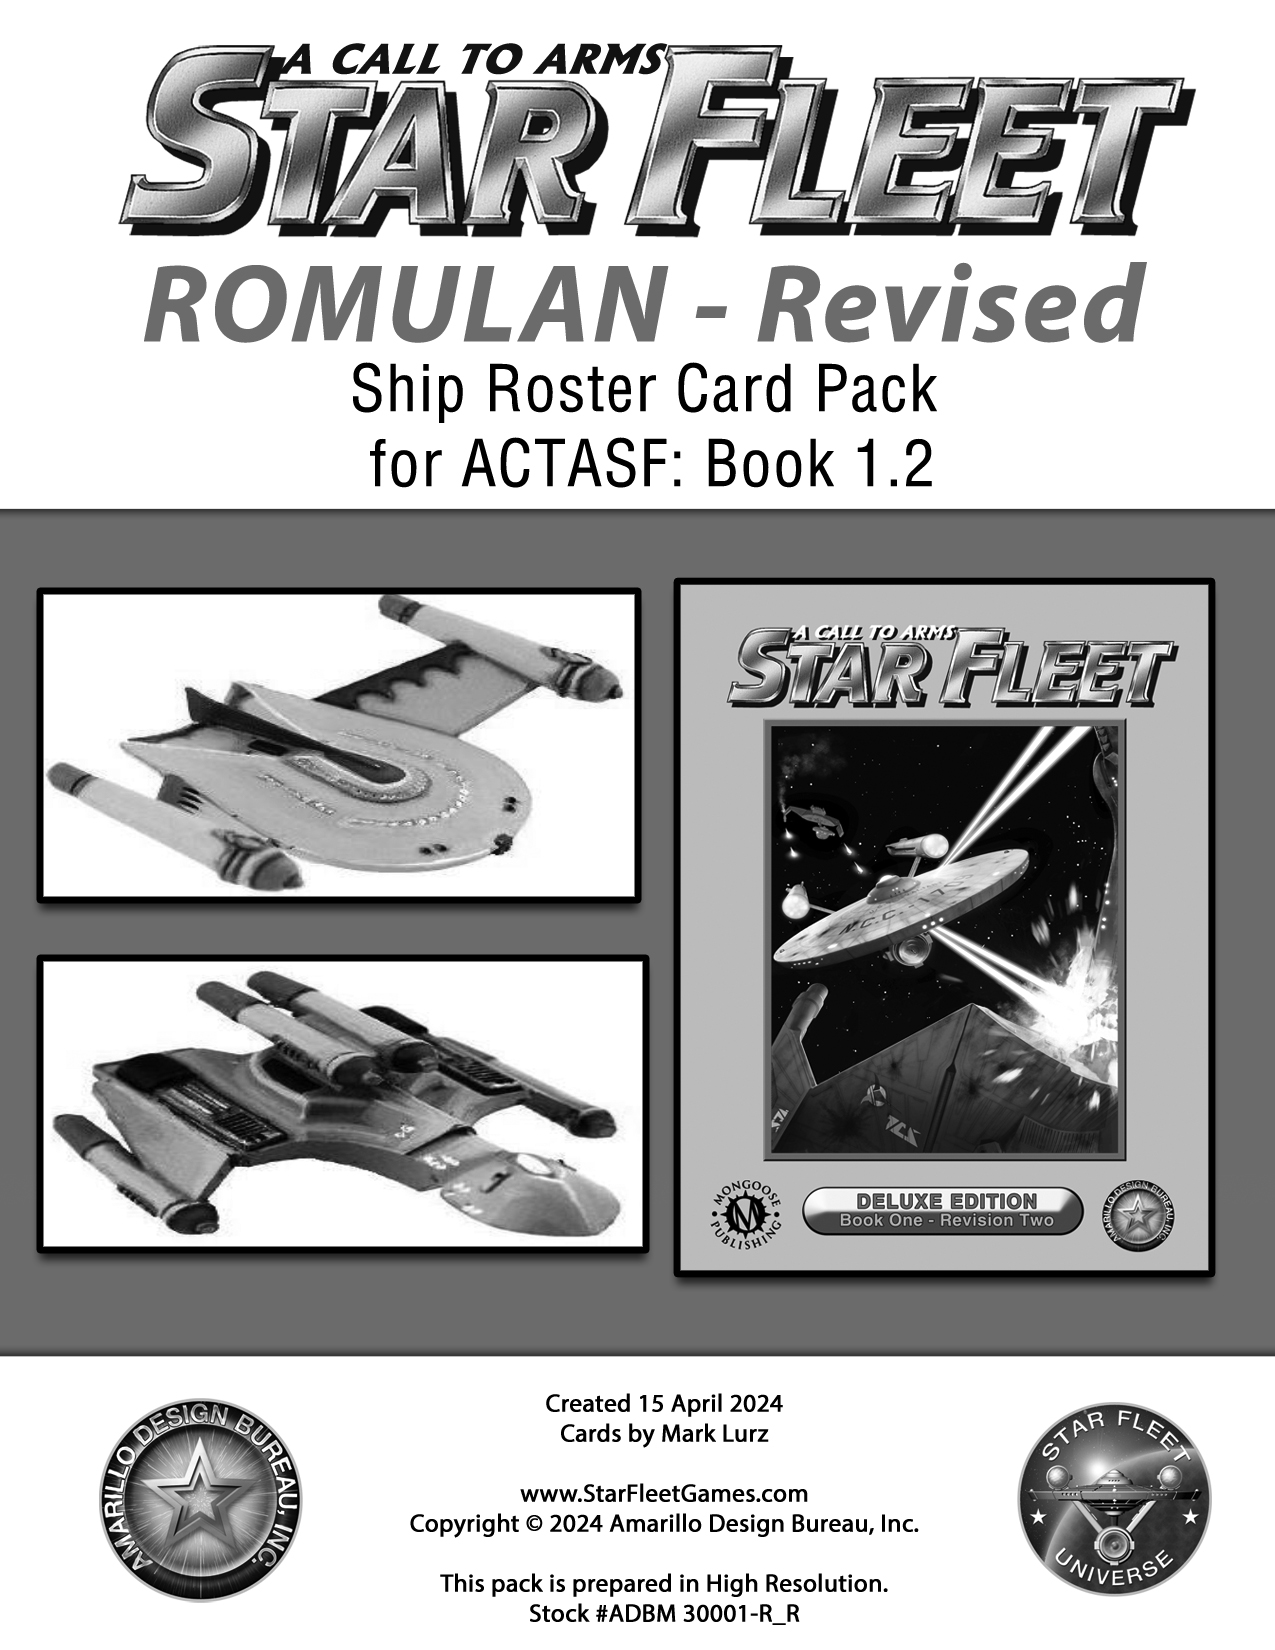 A Call to Arms: Star Fleet Book 1.2: Romulan Ship Roster Pack Deluxe